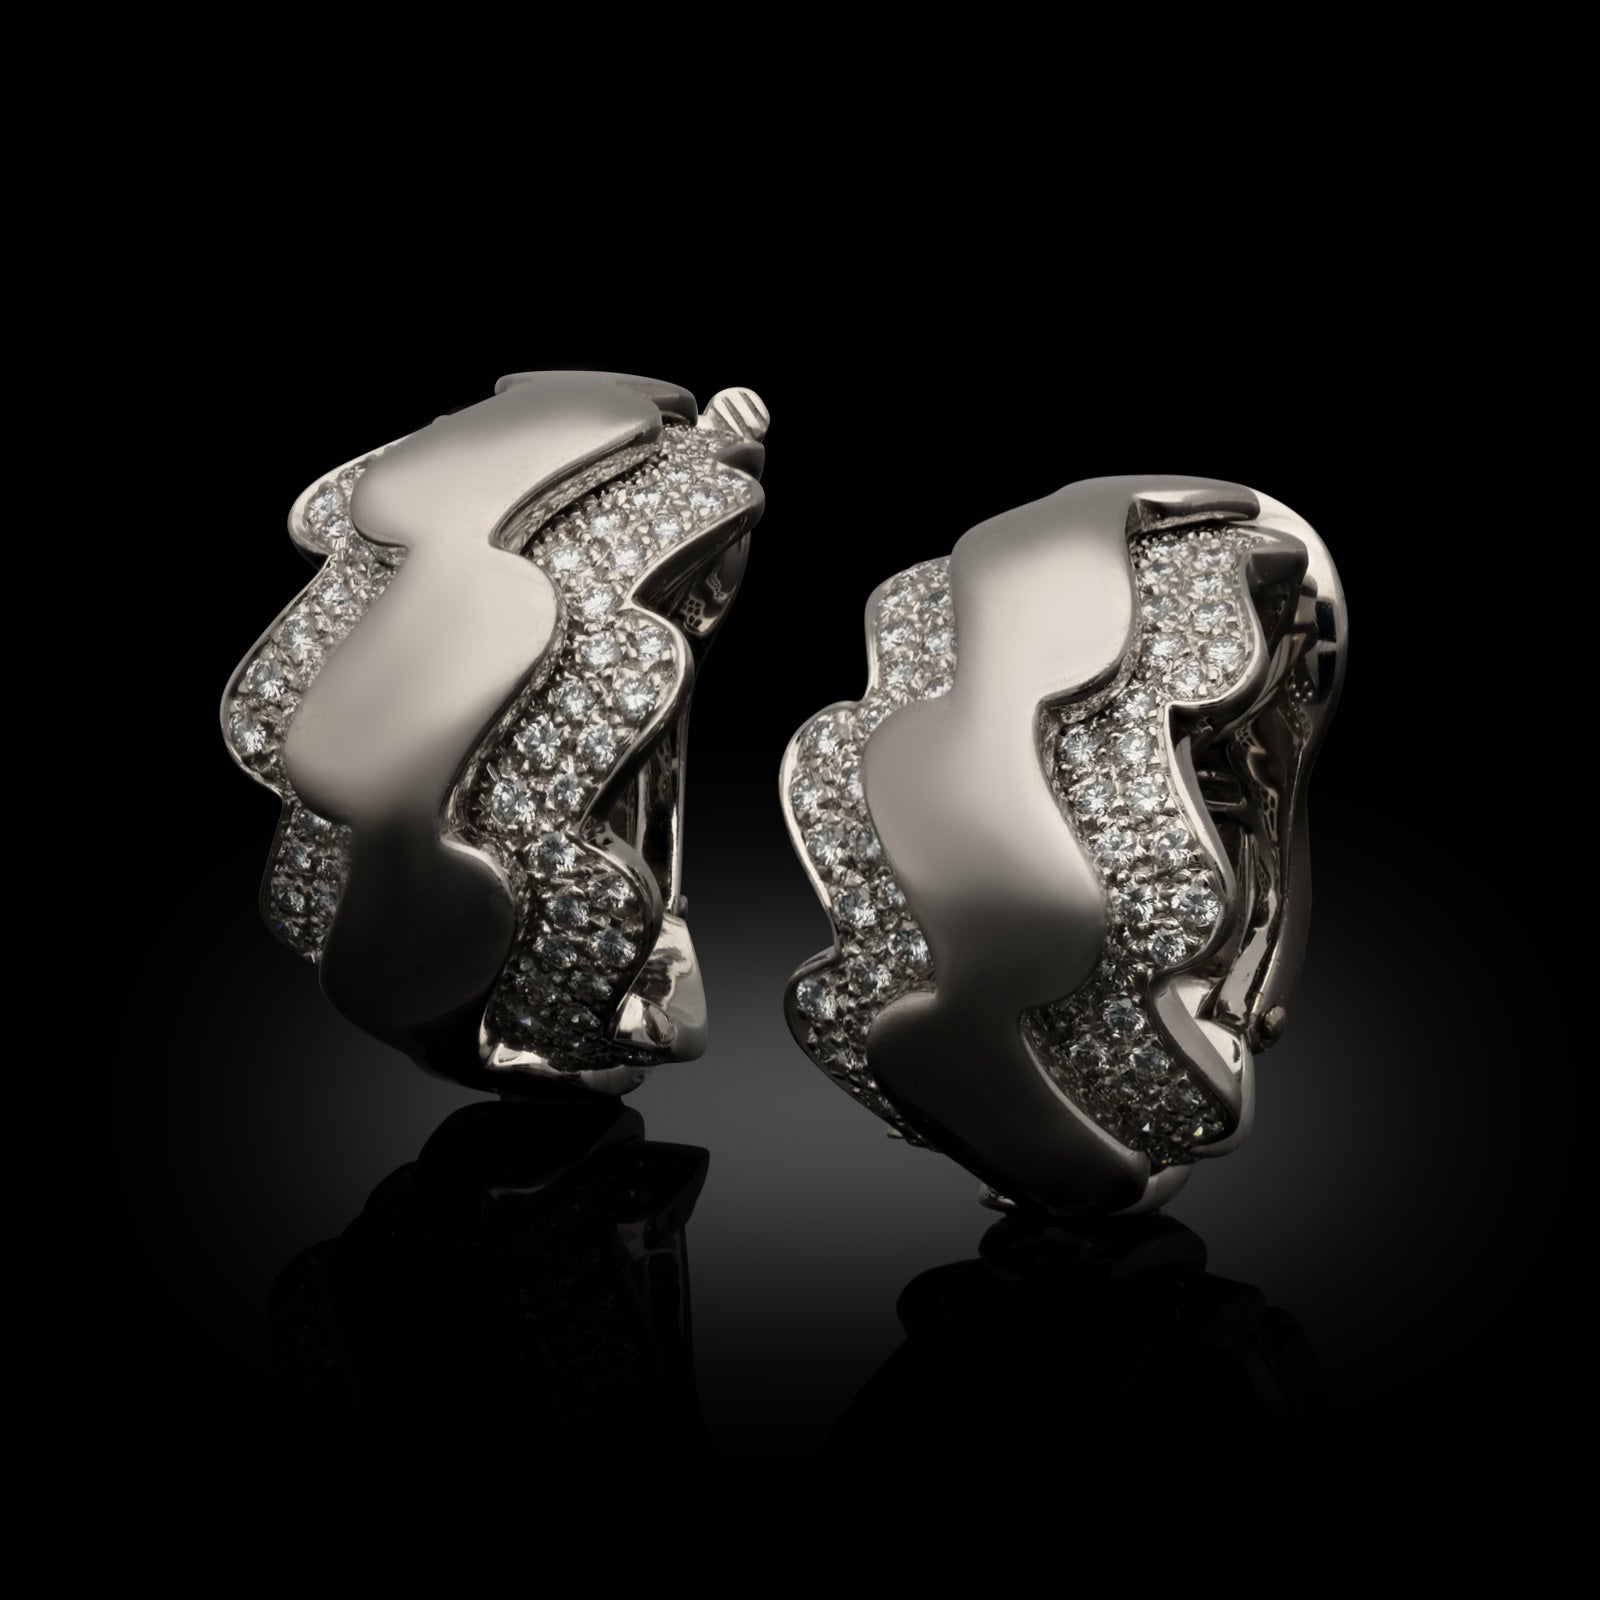 French Van Cleef & Arpels Post-1980s 18KT White Gold Diamond Wave Hoop Earrings front side view